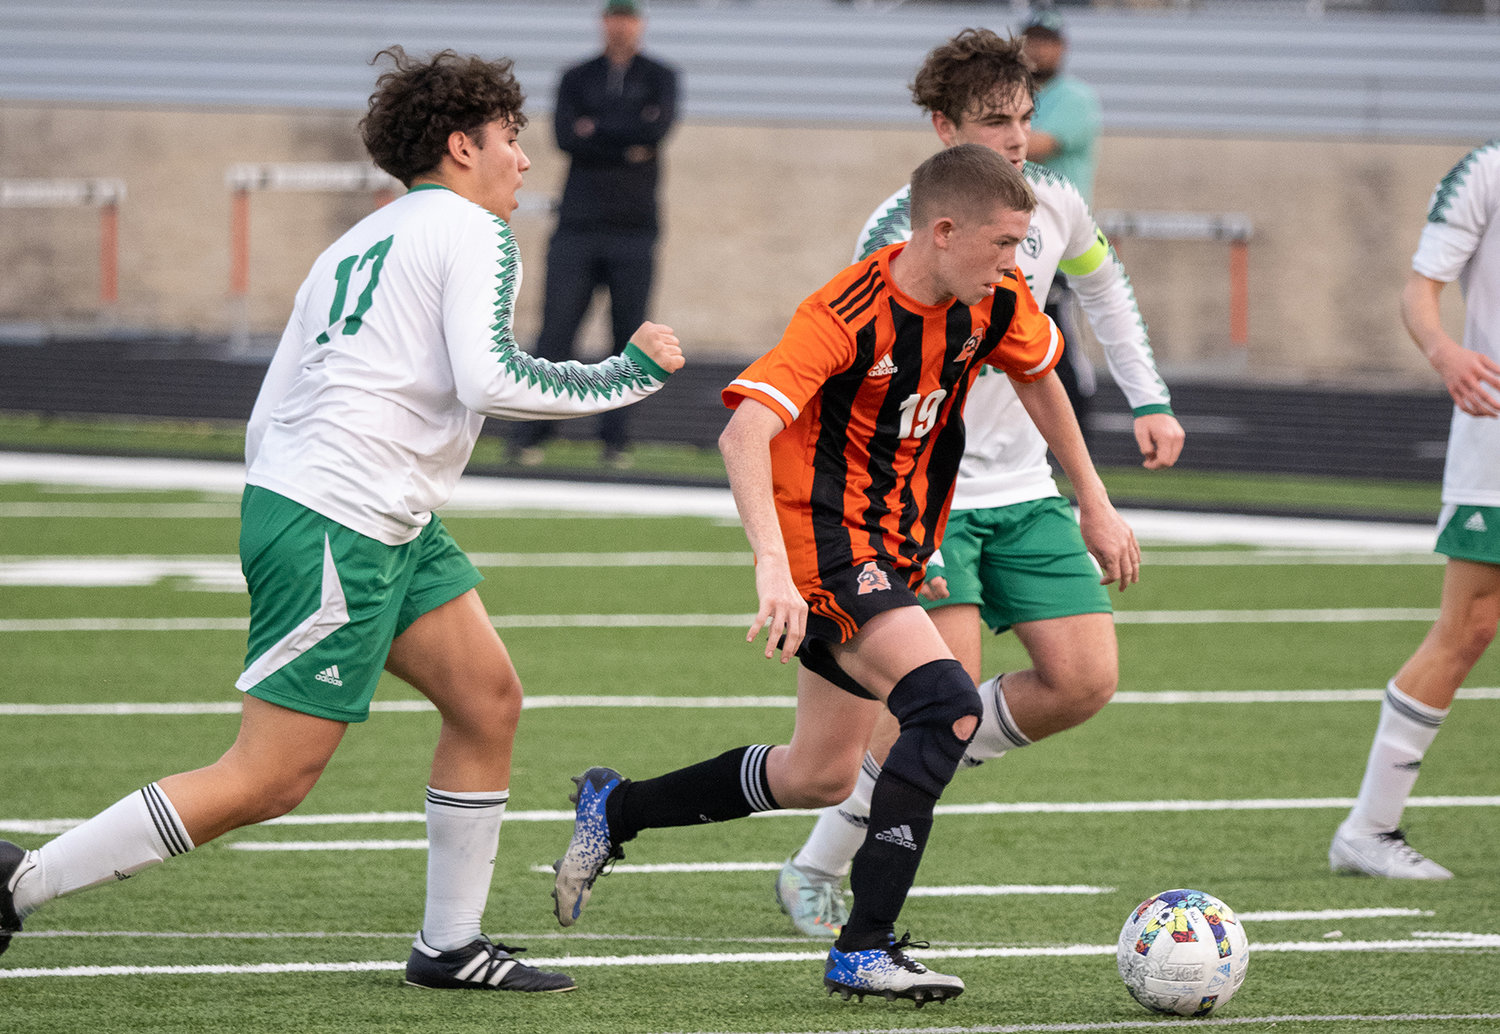 Robby Sloan drives passed a pair of Azle defenders during the second half of the match on Tuesday, March 7.